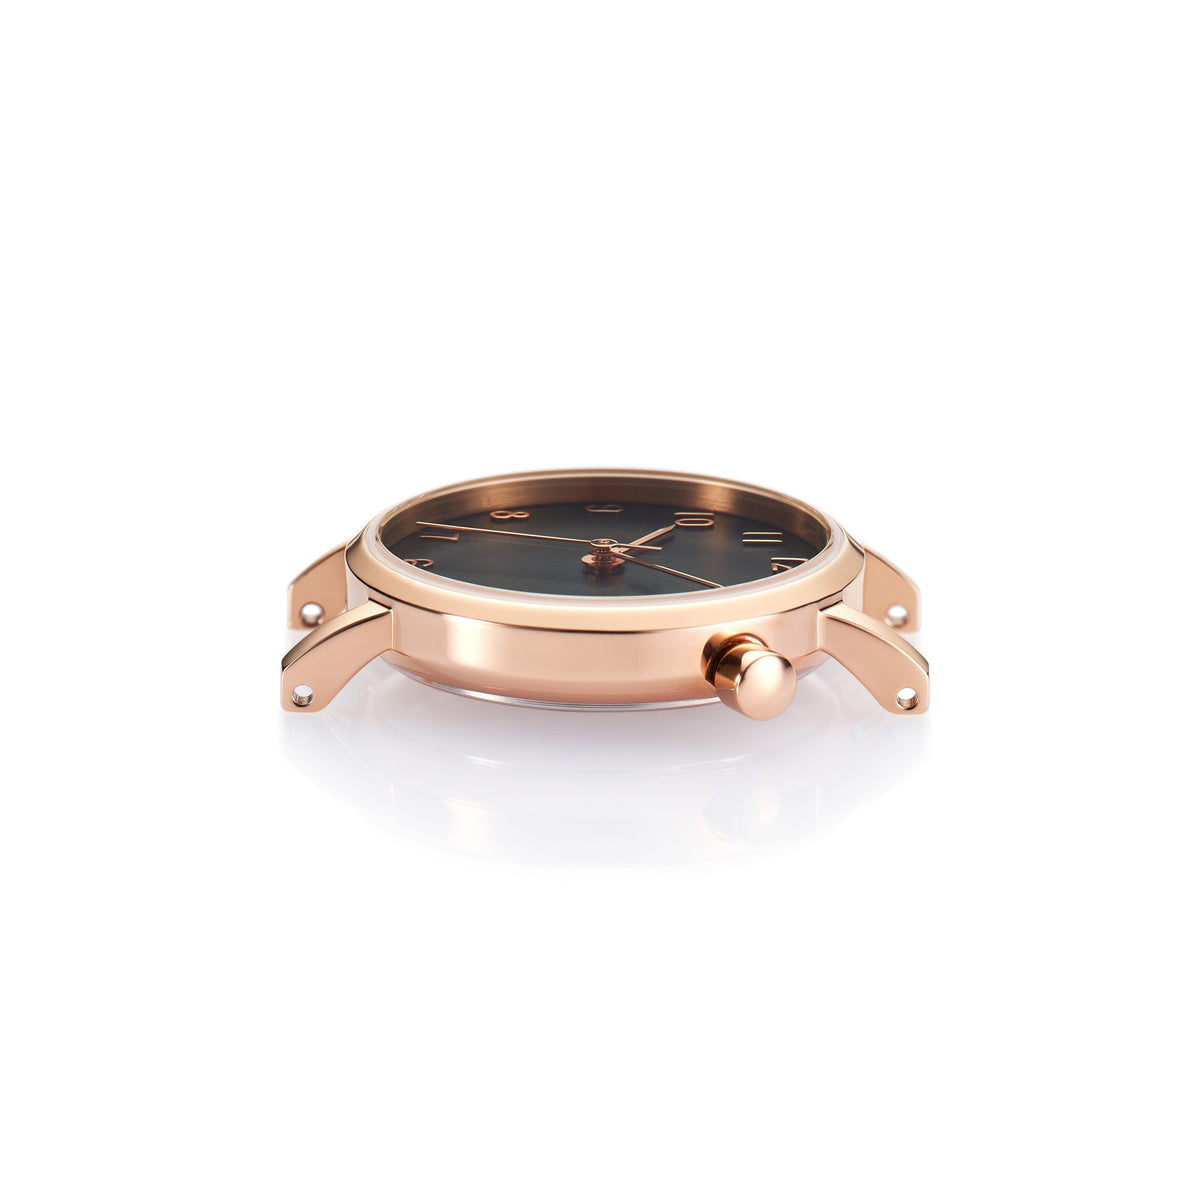 The Black and Rose Gold Watch -  Triangles (Kids)